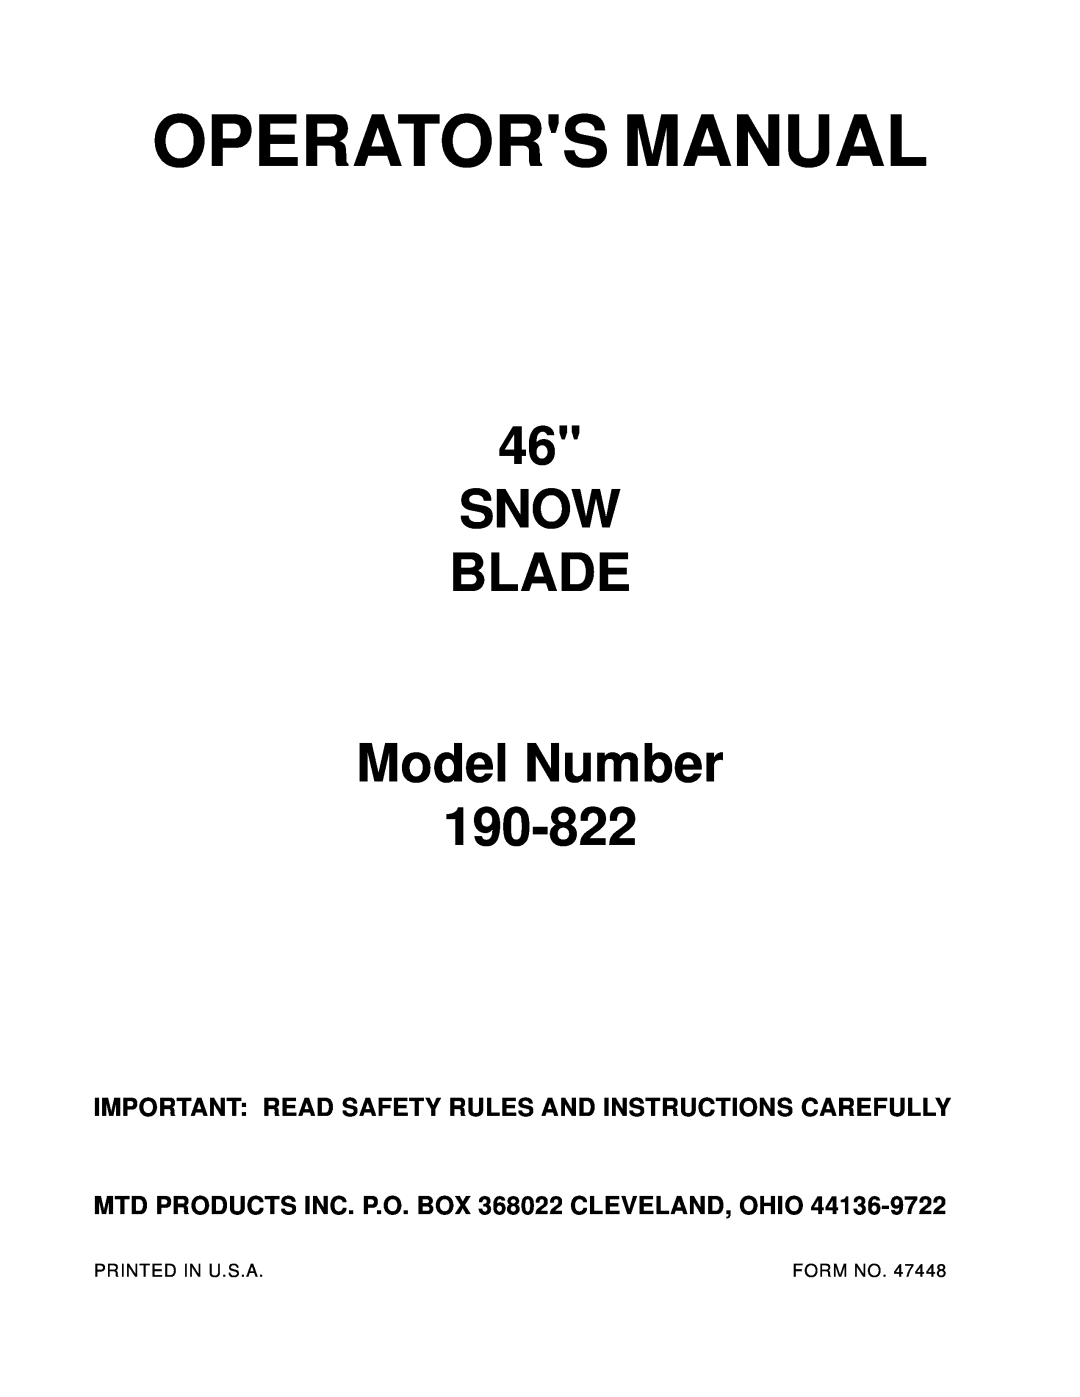 MTD 46" SNOW BLADE, 190-822 manual Important Read Safety Rules And Instructions Carefully, Operators Manual 